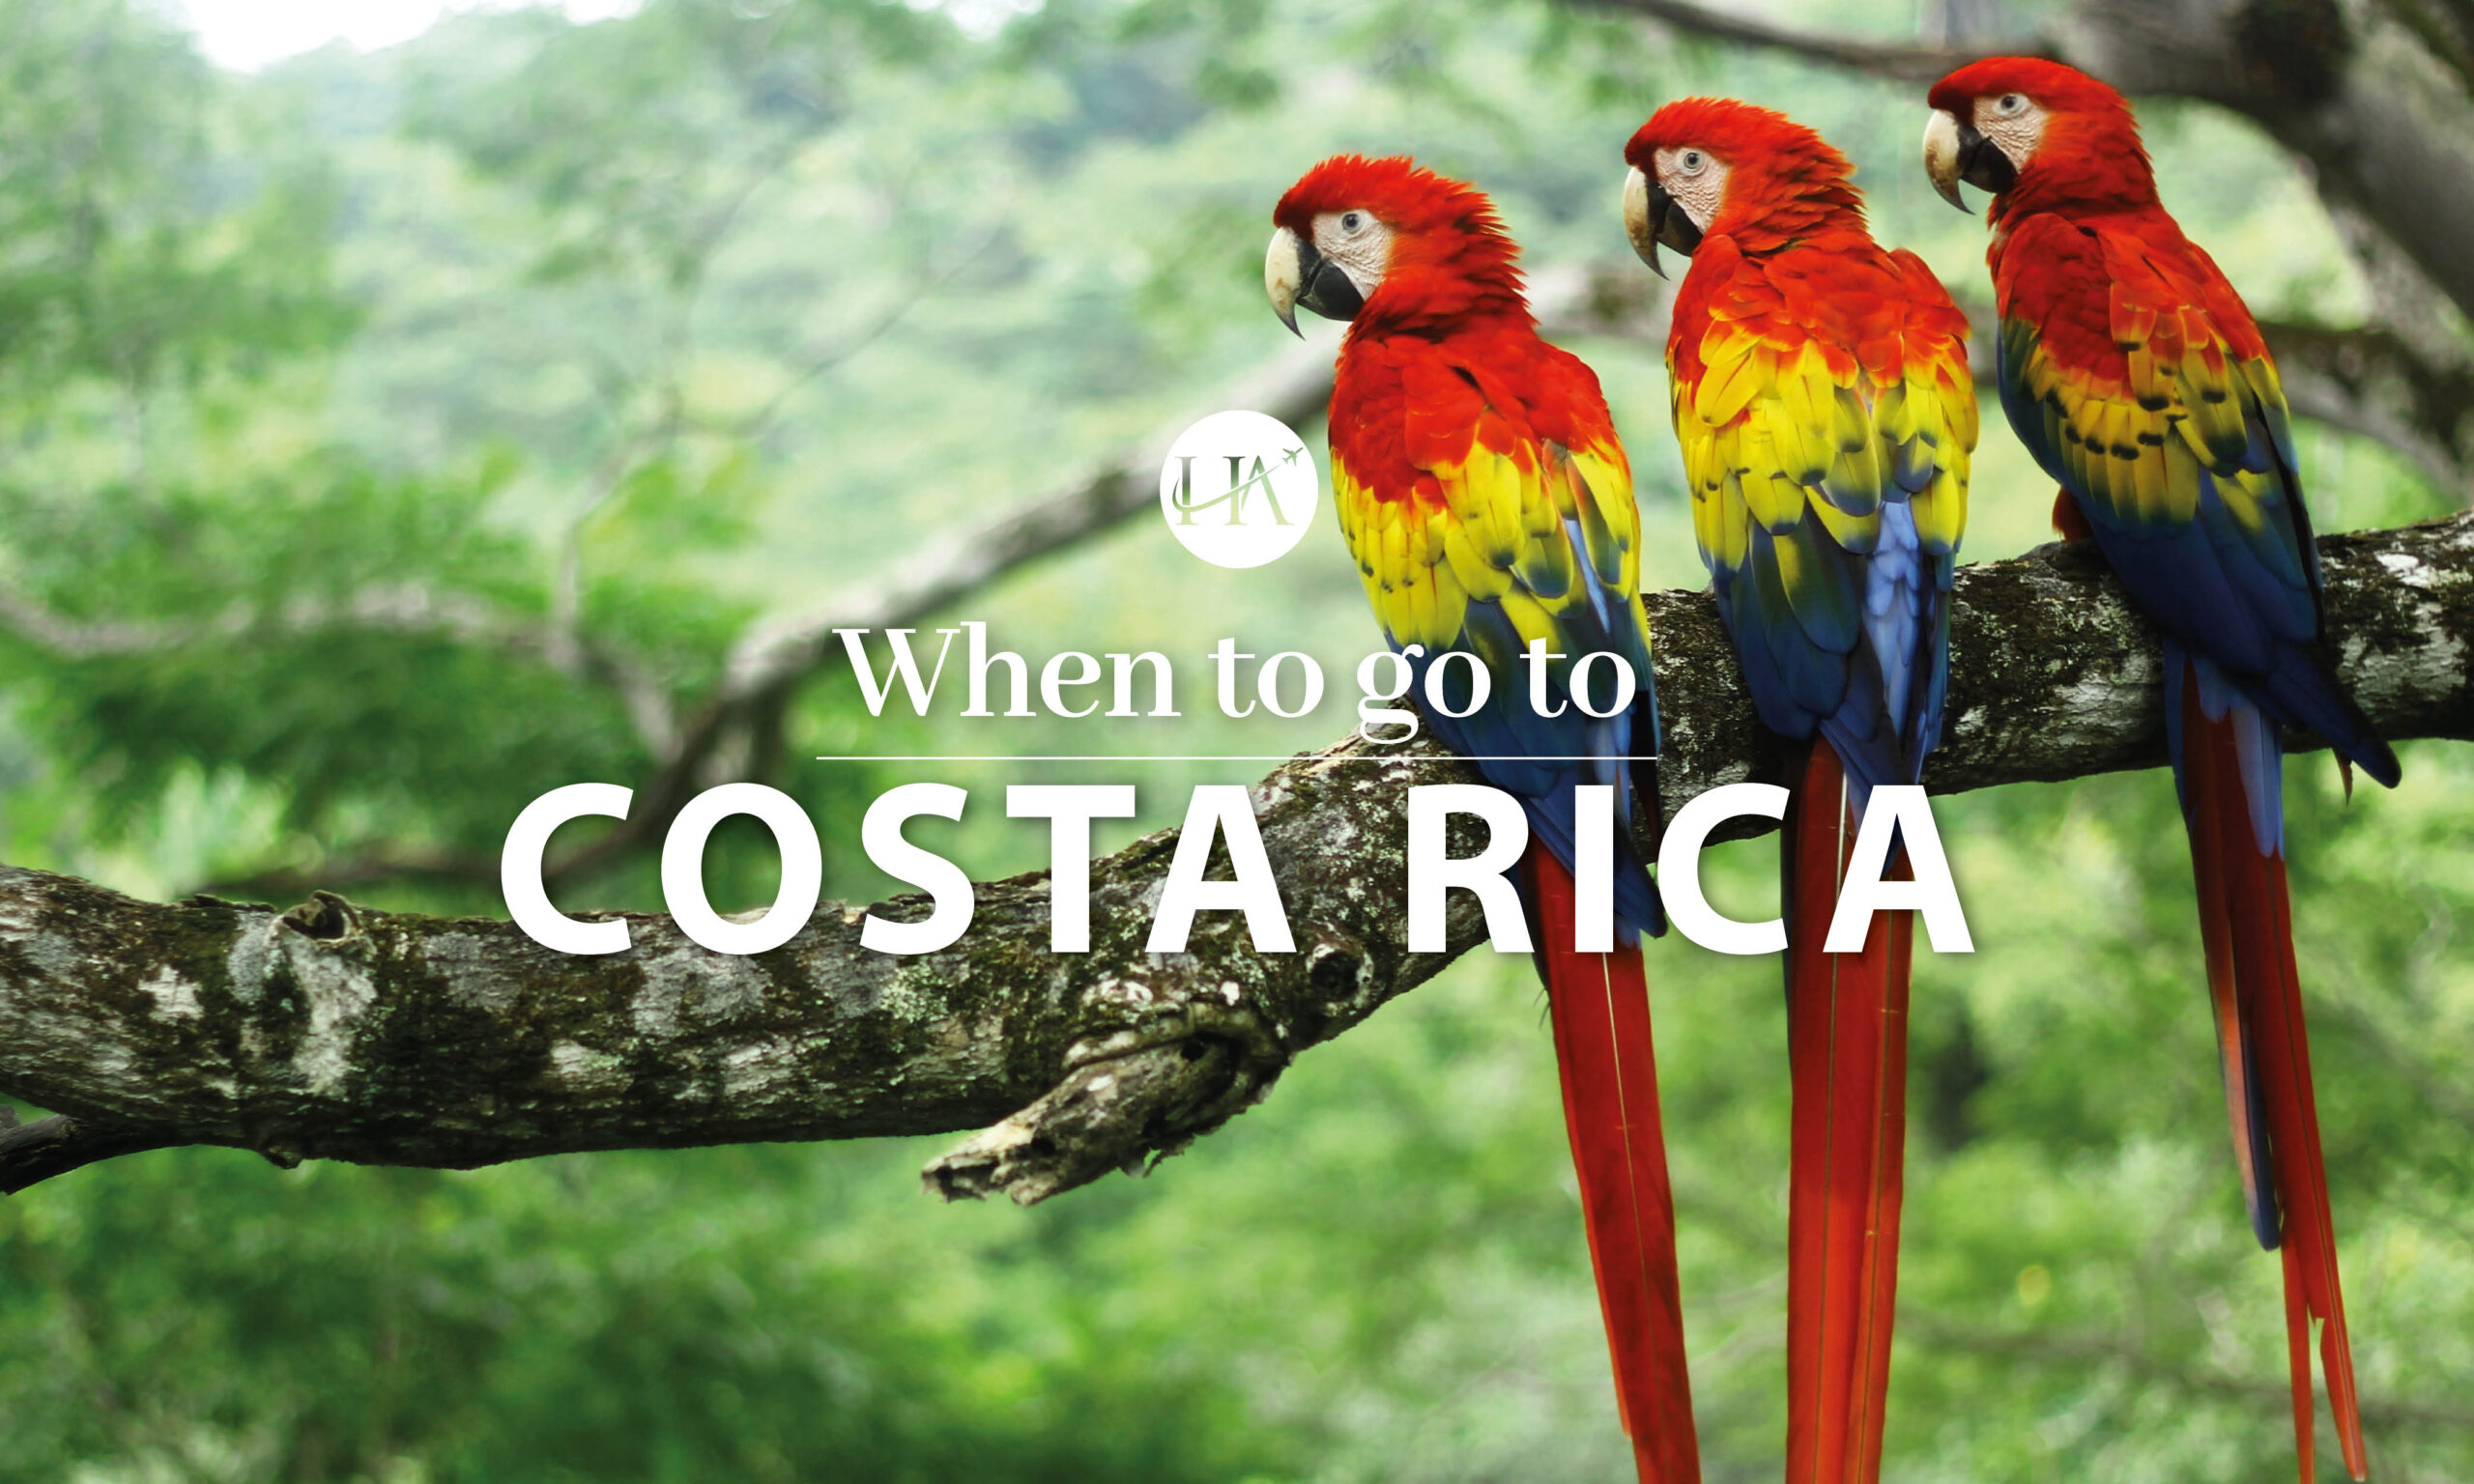 When to go to Costa Rica